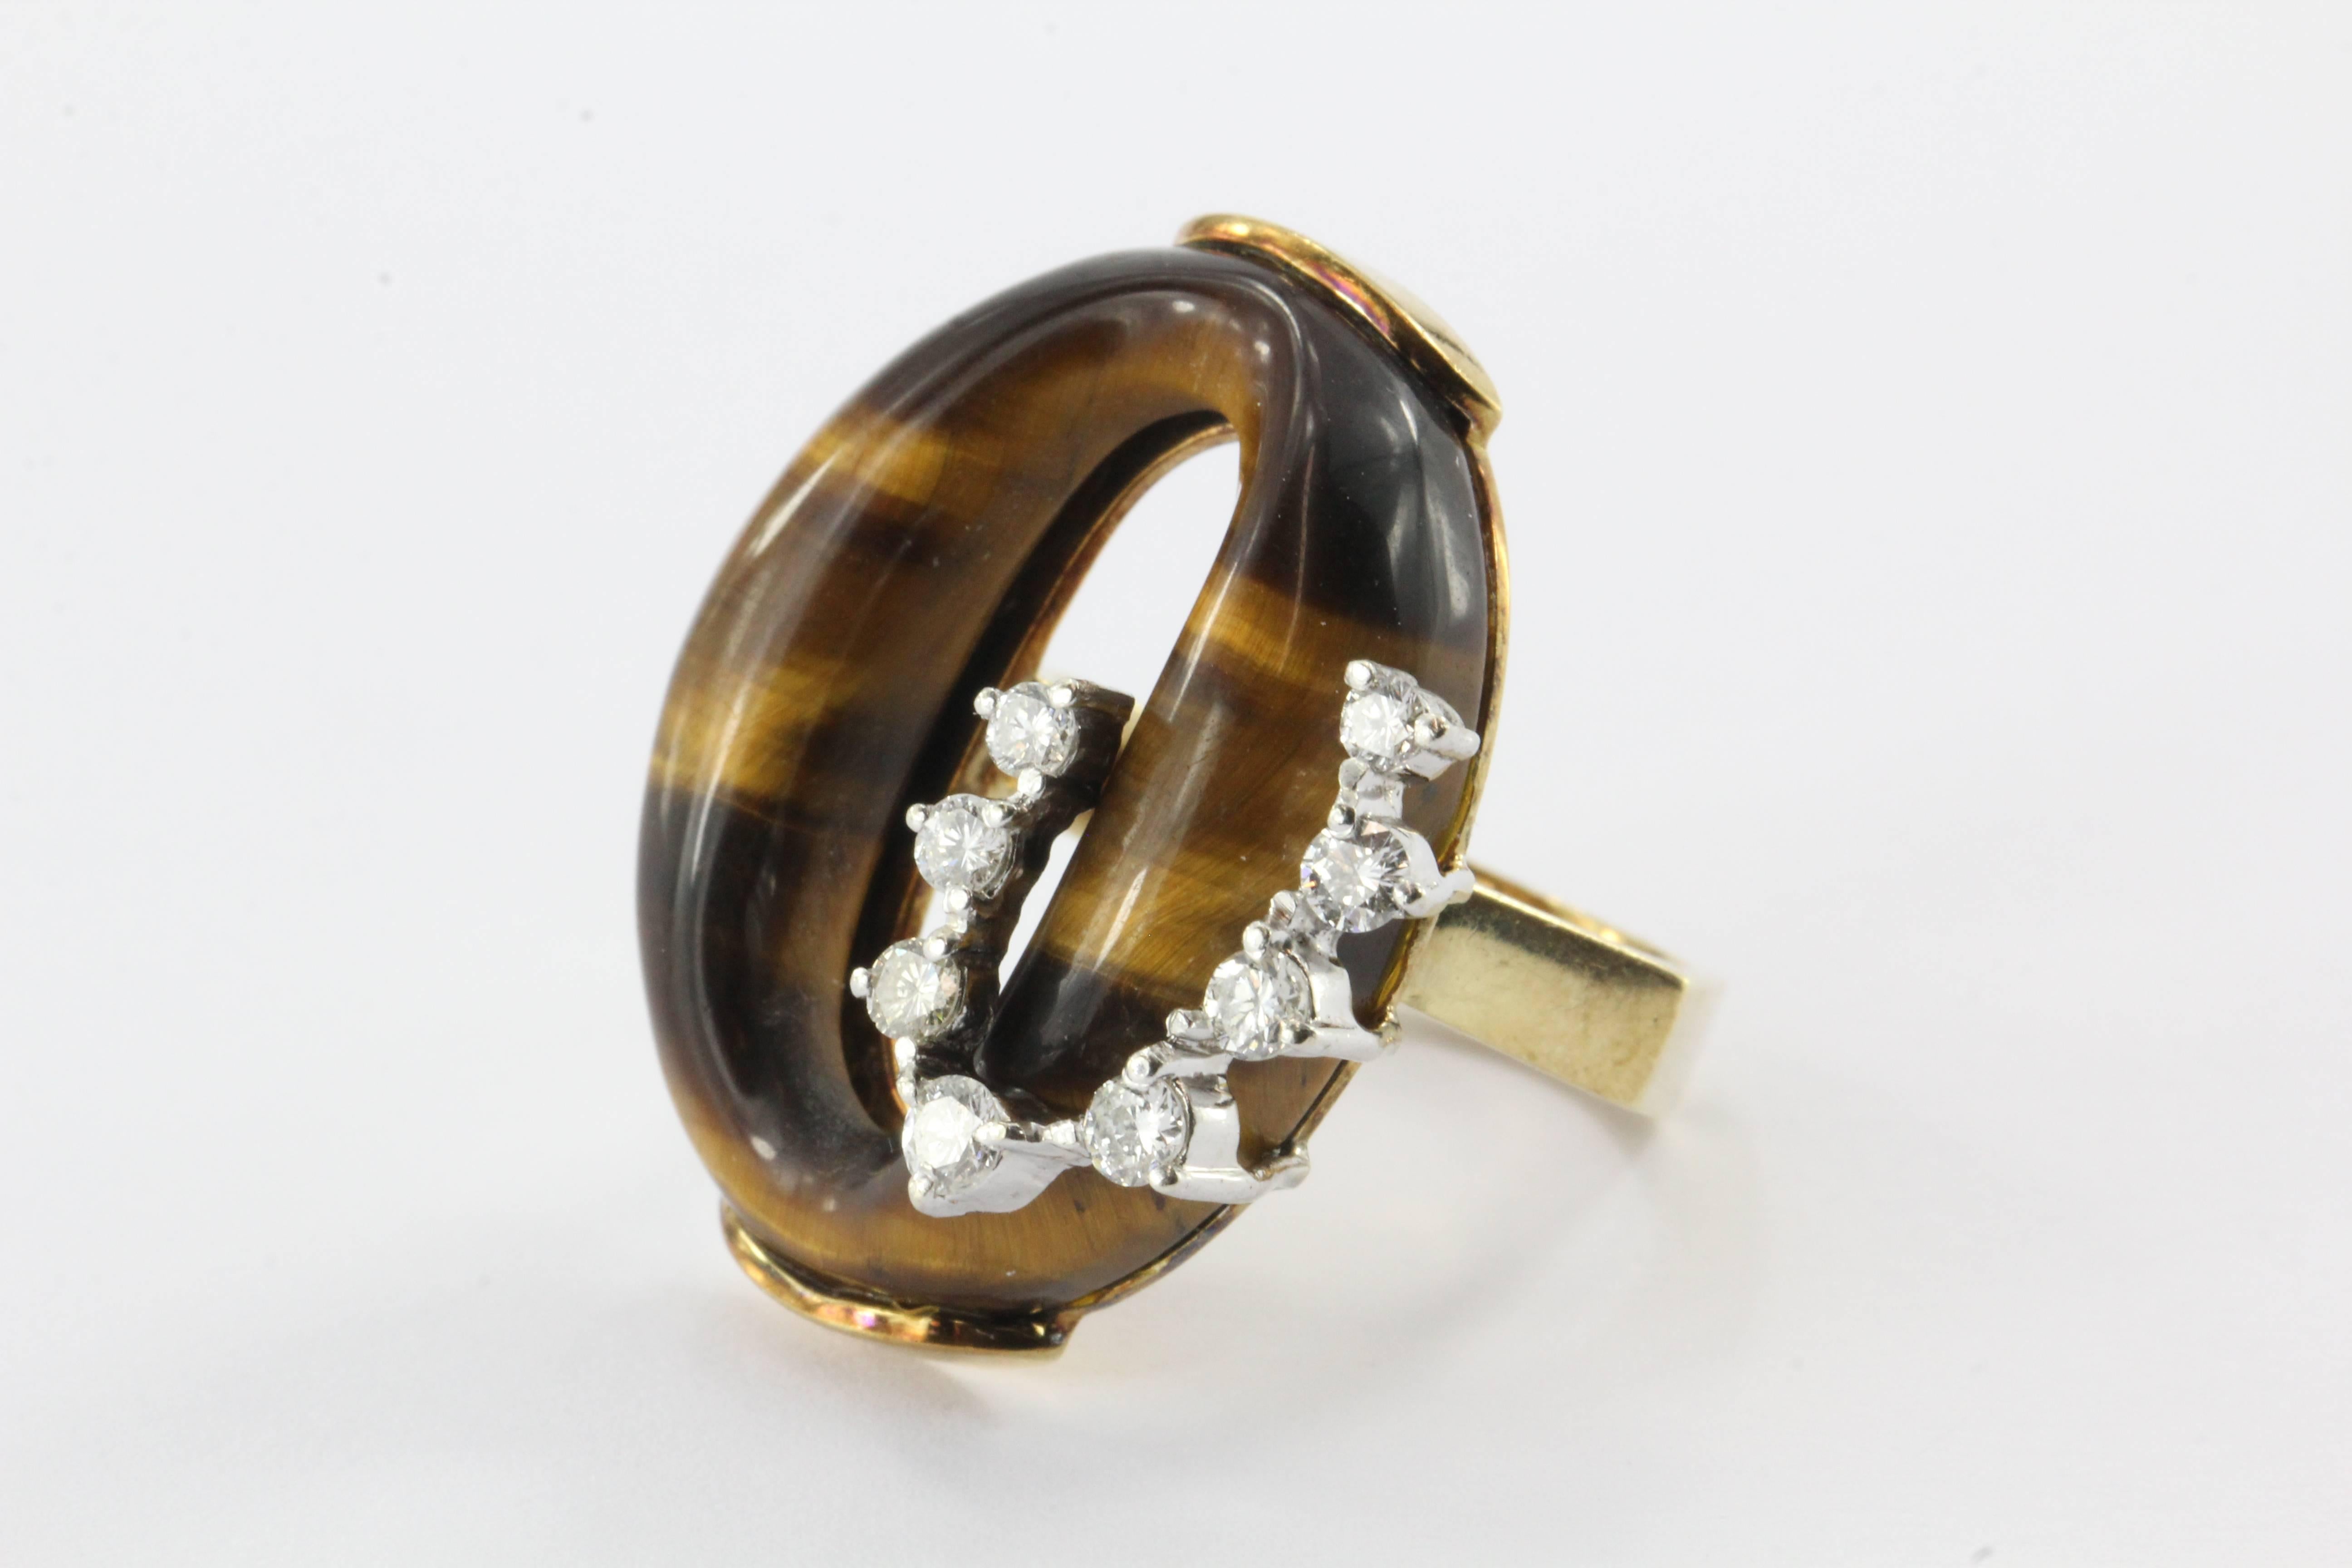 This unusual cocktail ring, reminiscent in design of a coiled snake, features an oval tigers eye mounted on an 18k gold hexagonal ring and topped with diamonds.

The 8 diamonds are F-H in color and vs1 in clarity.

CTW is .4

Size 5

Weighs